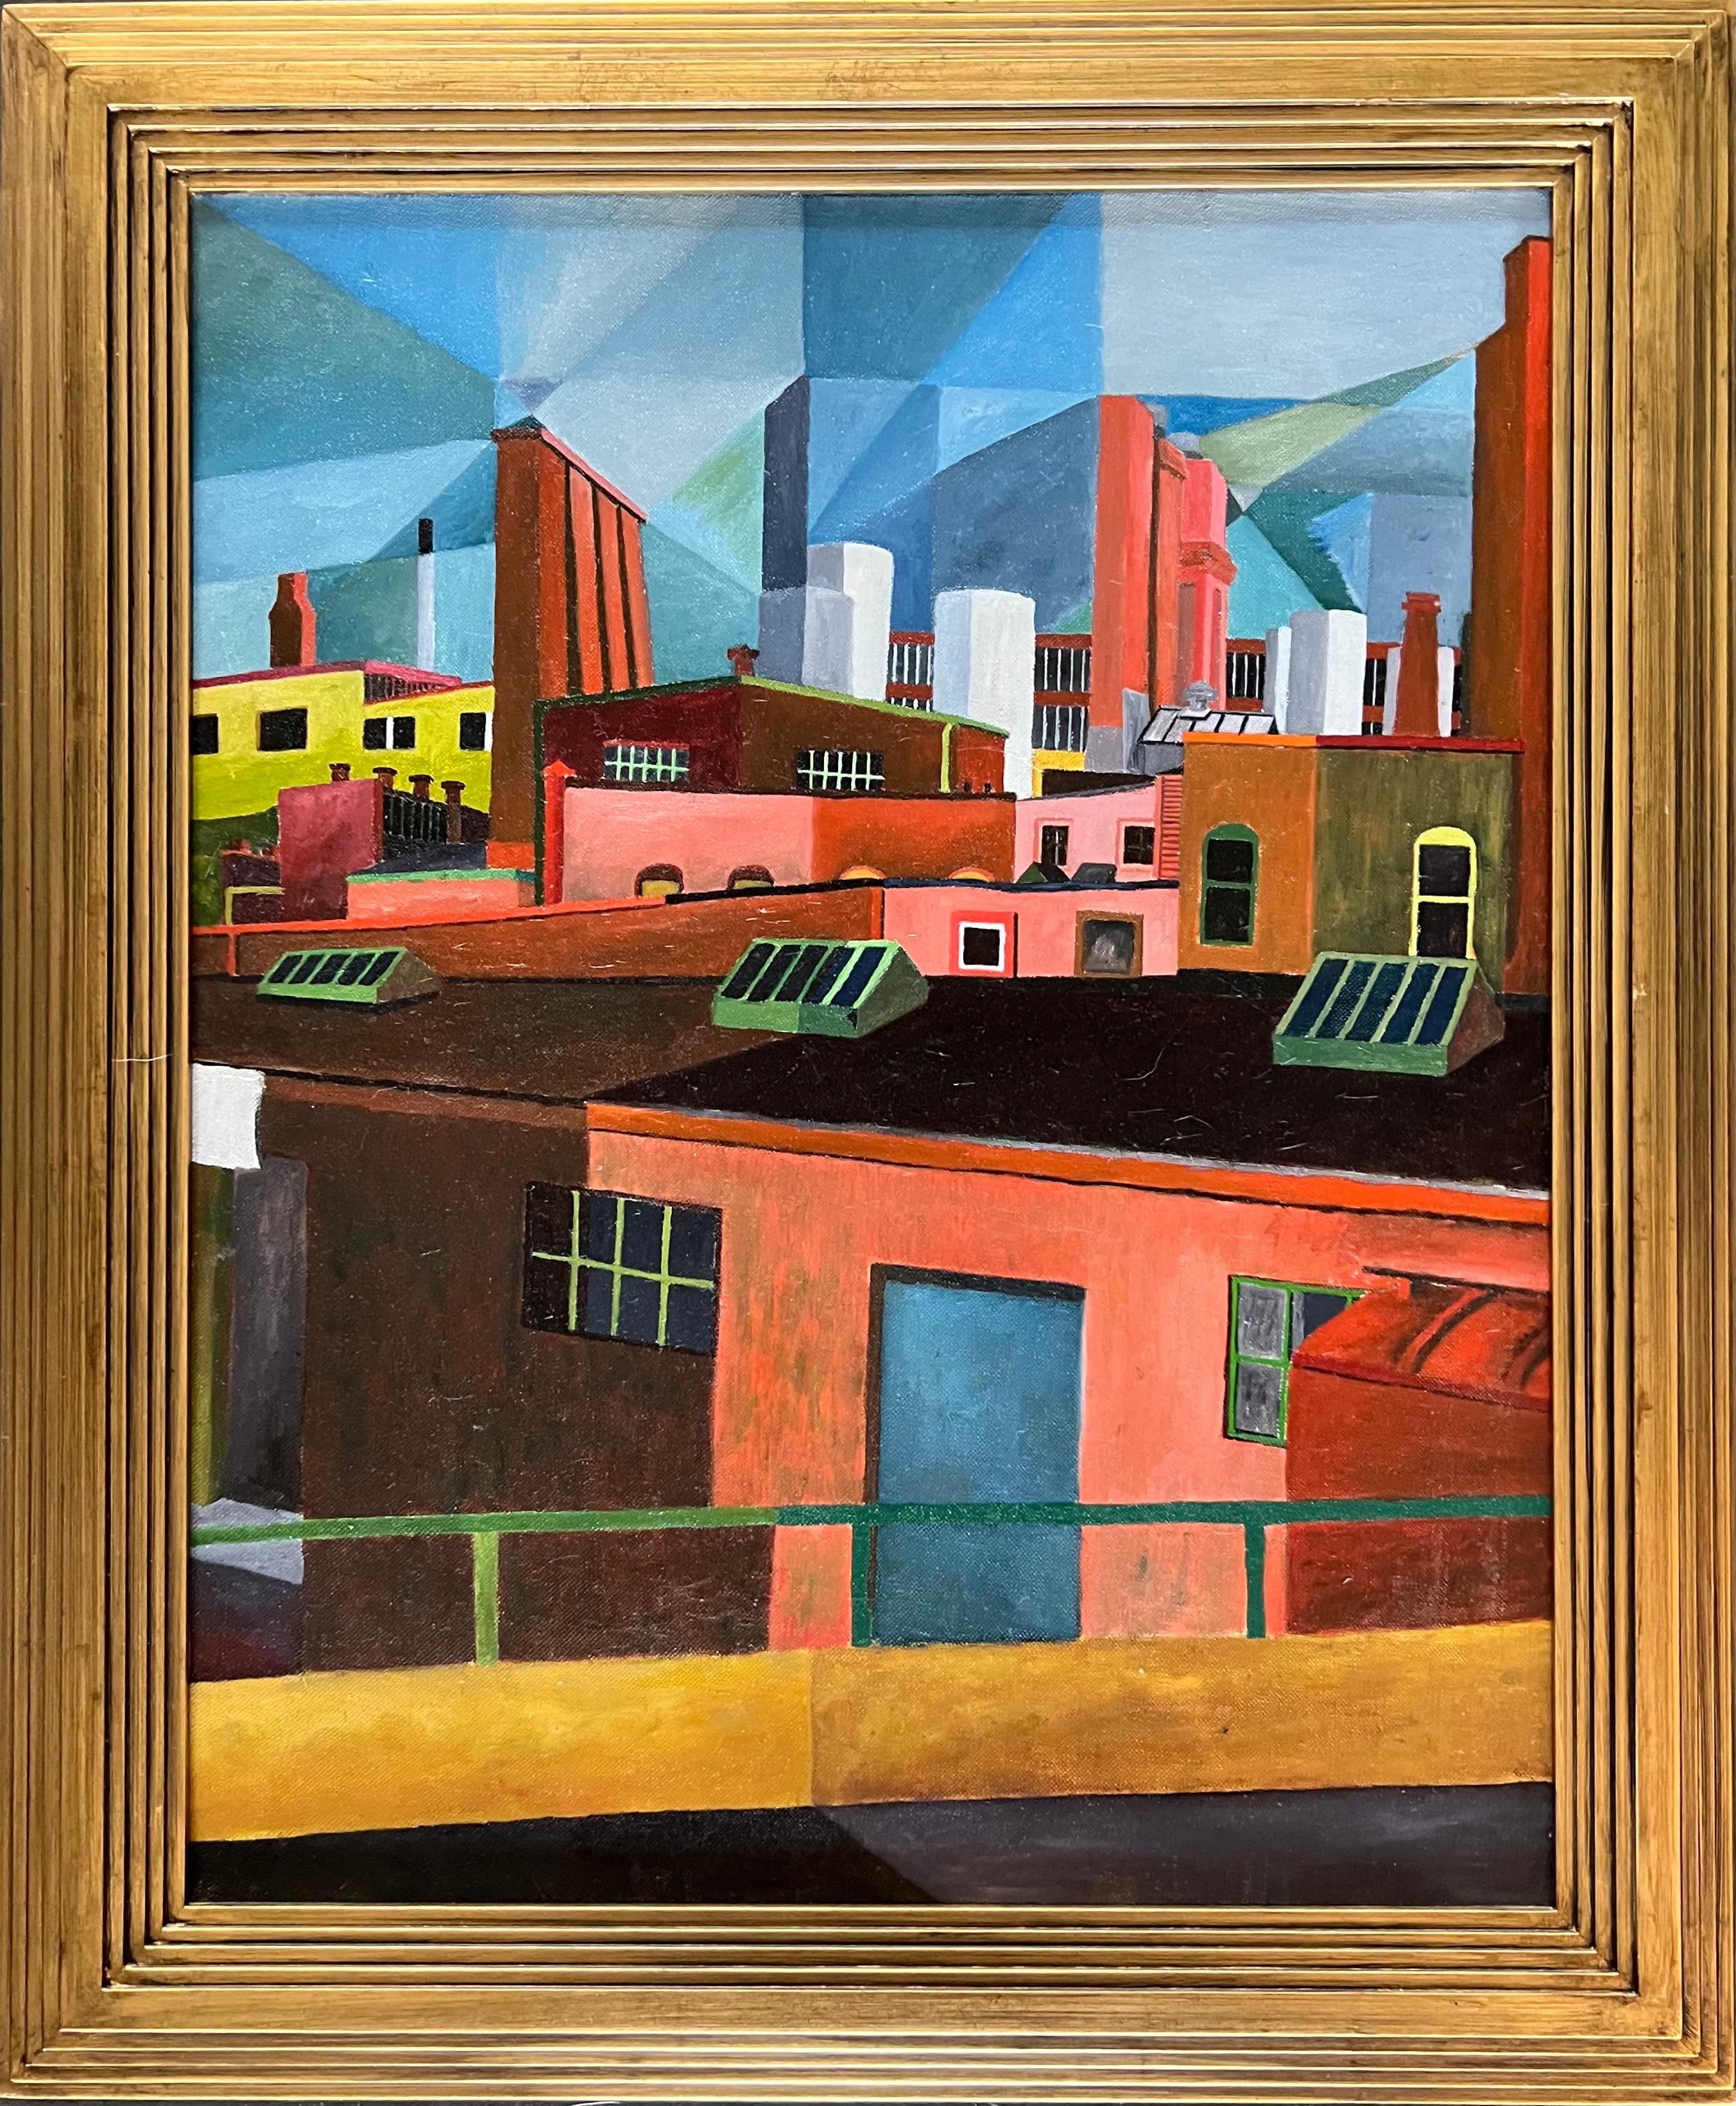 Factory Scene WPA Mid 20th Century American Realism Cubist Industrial Modernism - Painting by Beni E. Kosh